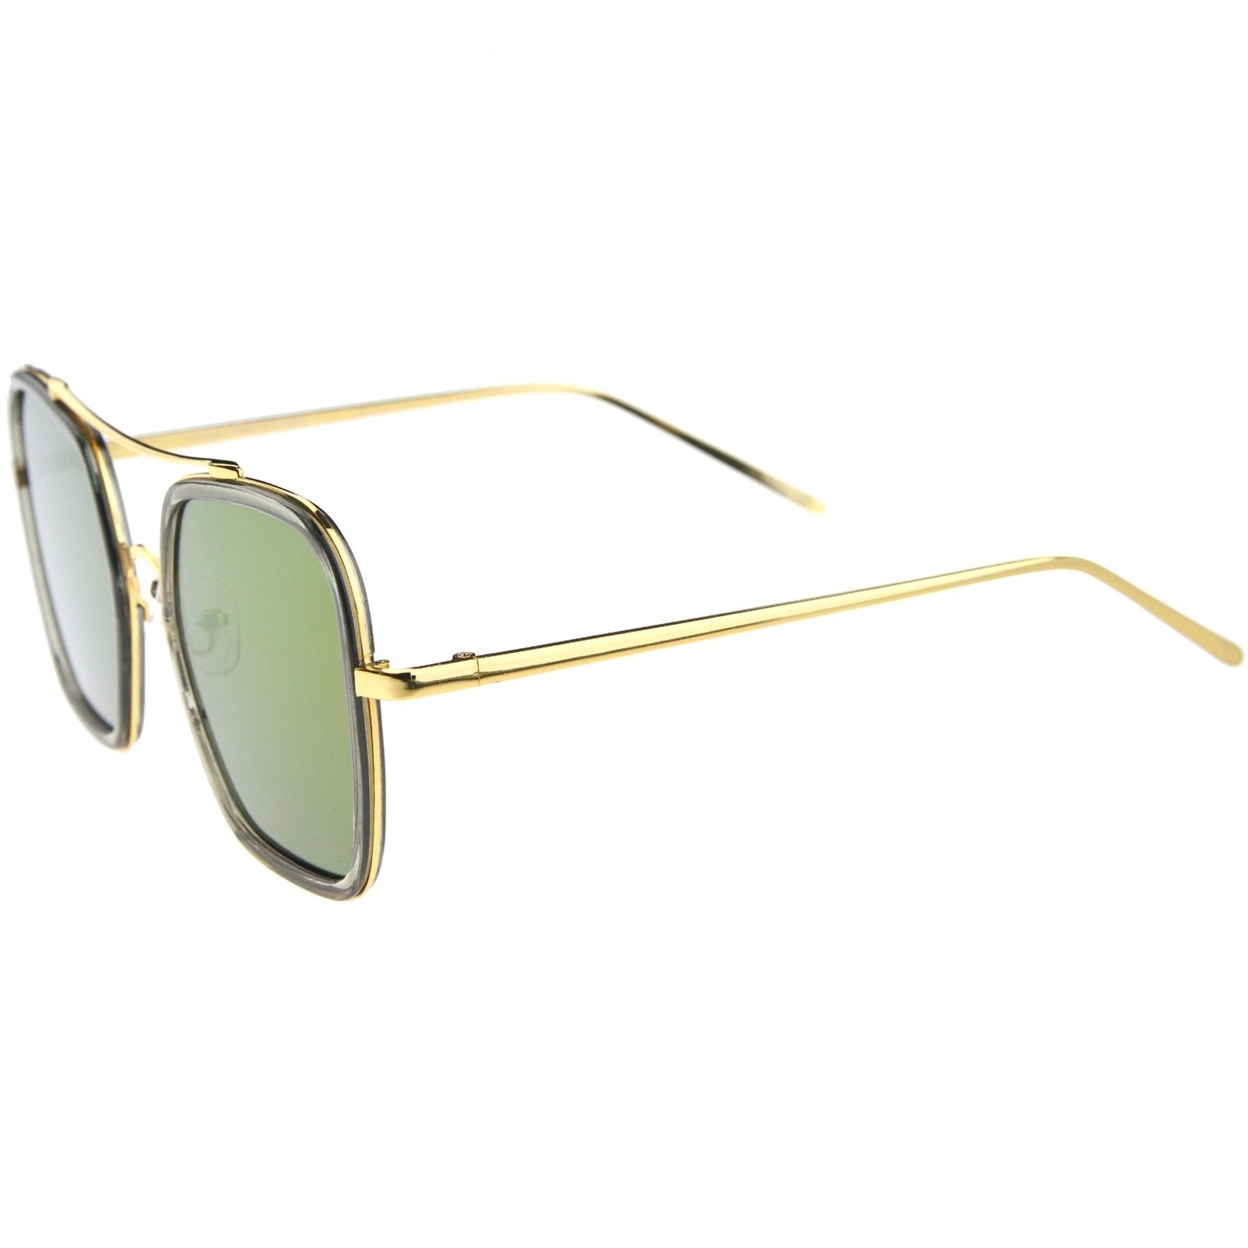 Modern Slim Temple Browbar Color Mirrored Flat Lens Square Sunglasses 52mm - Clear-Silver / Silver Mirror